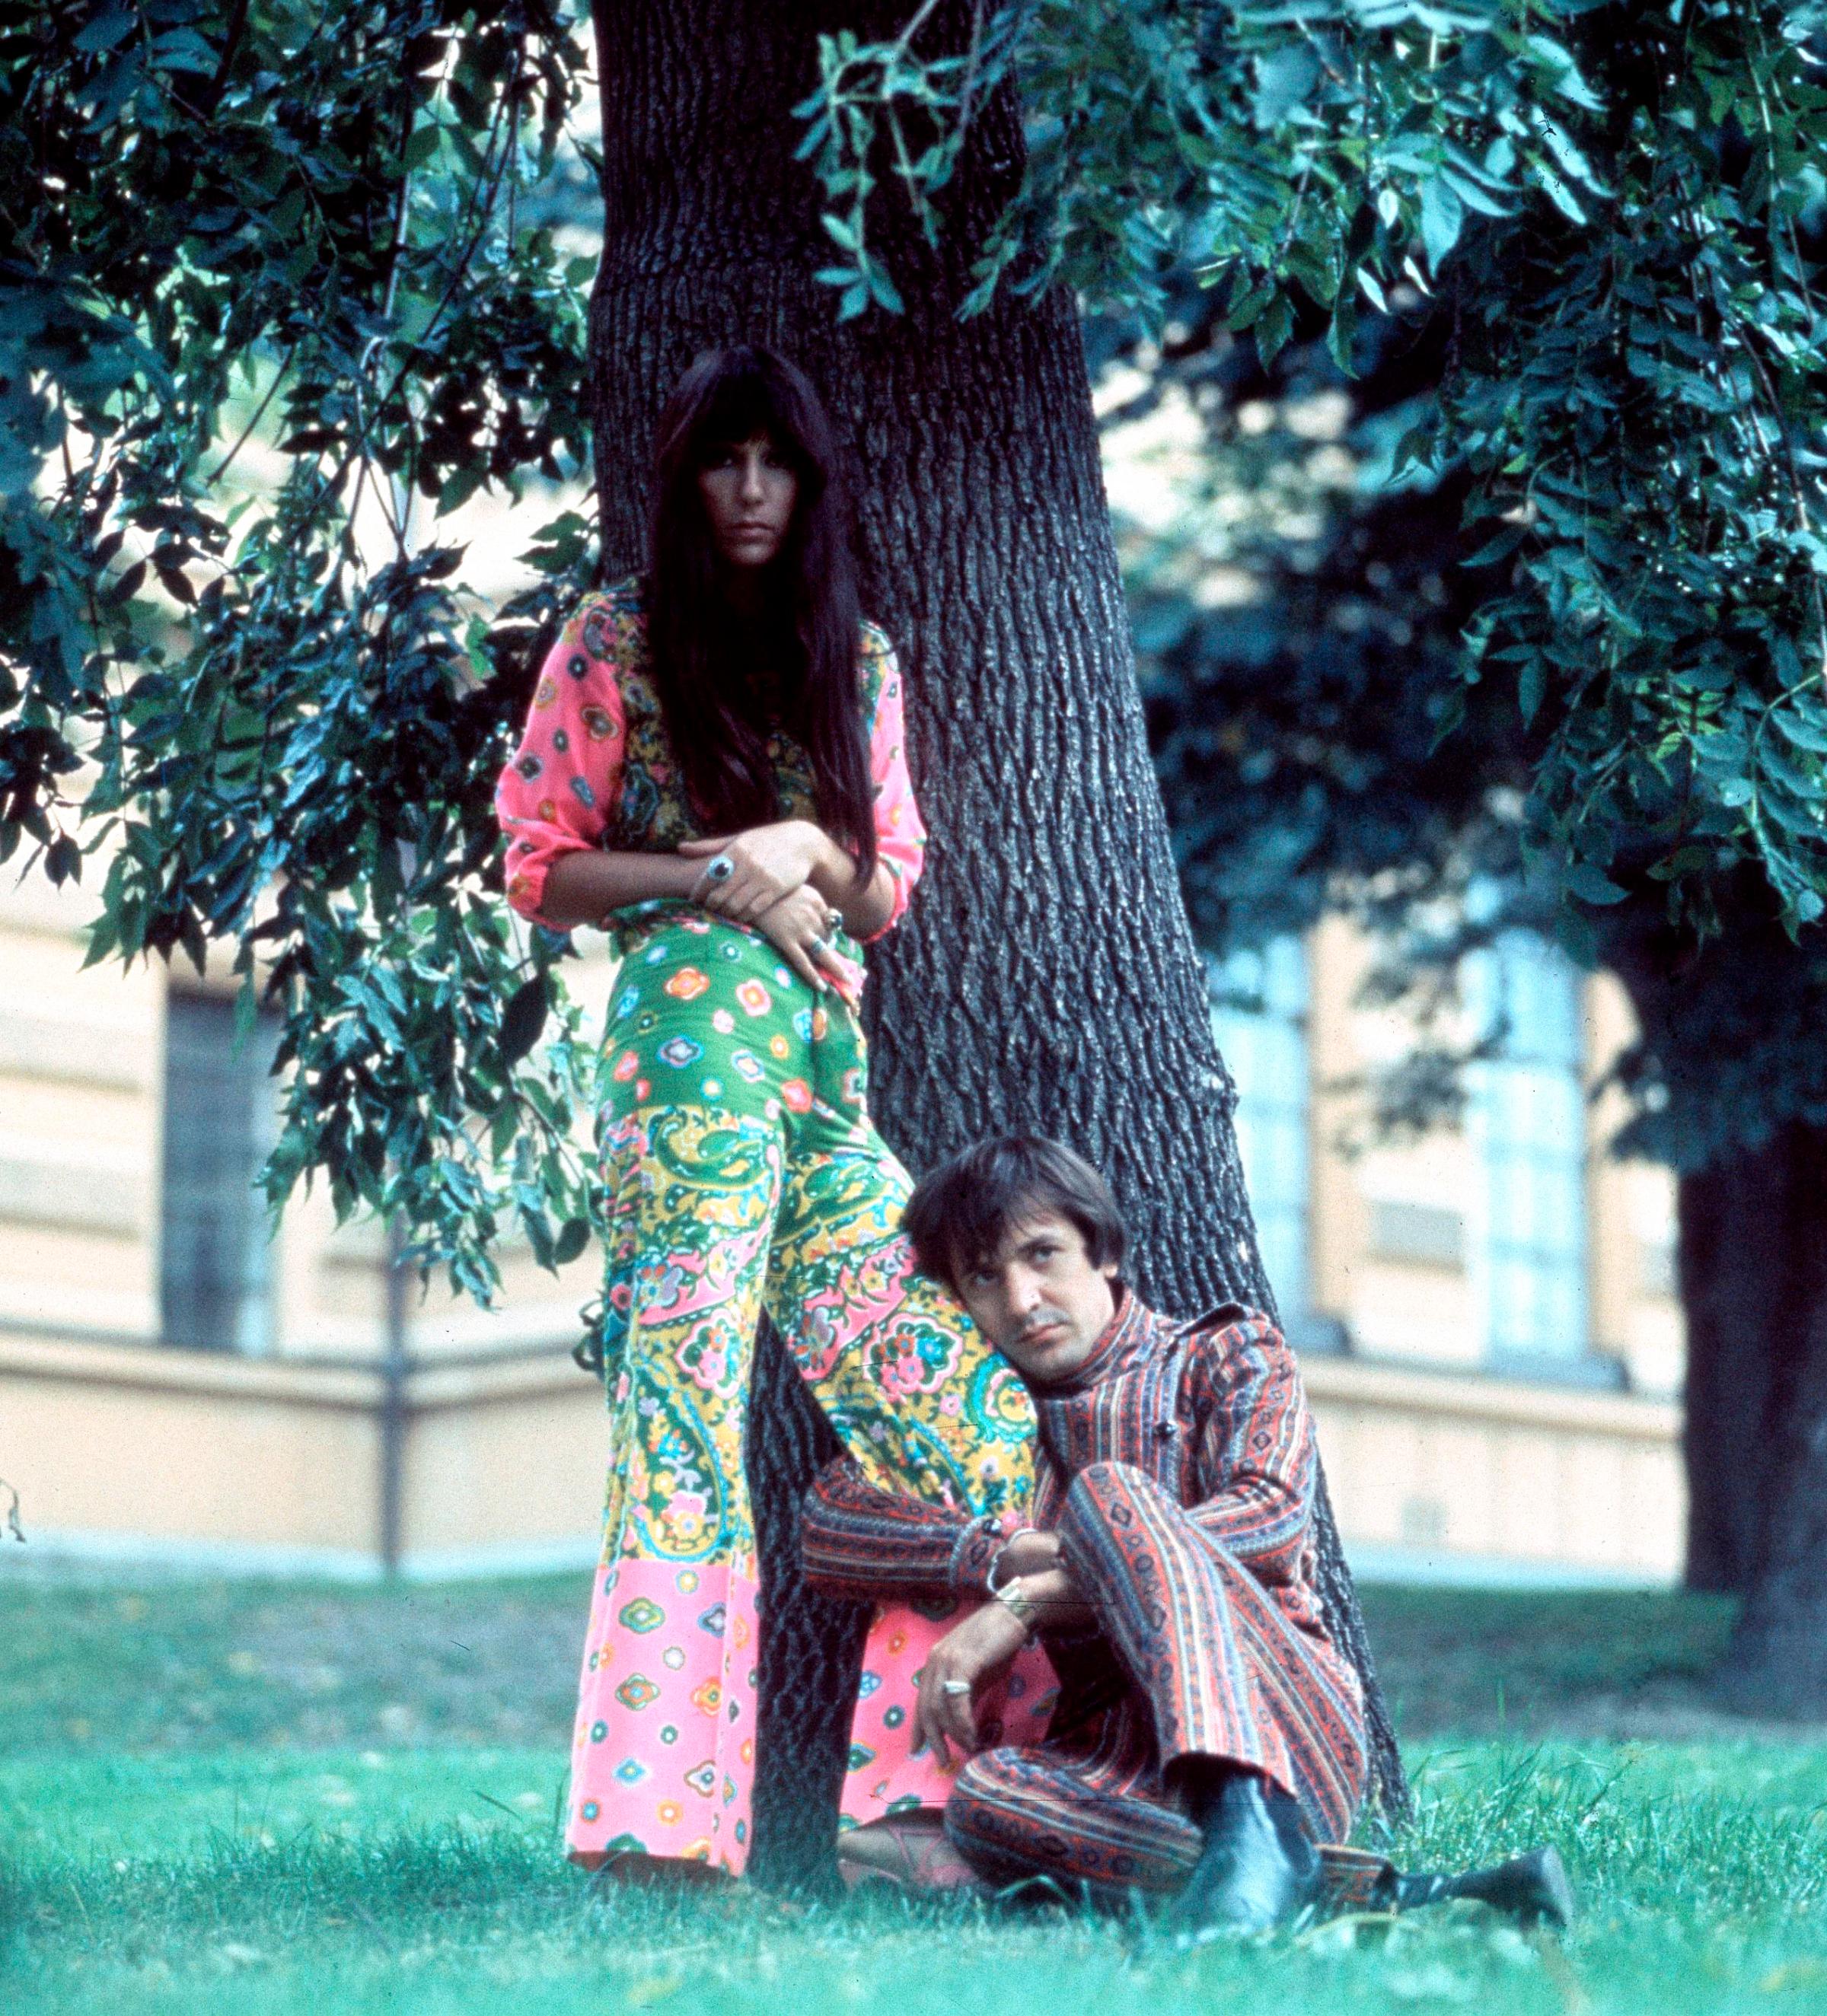 Sonny & Cher in the mid-1960s.